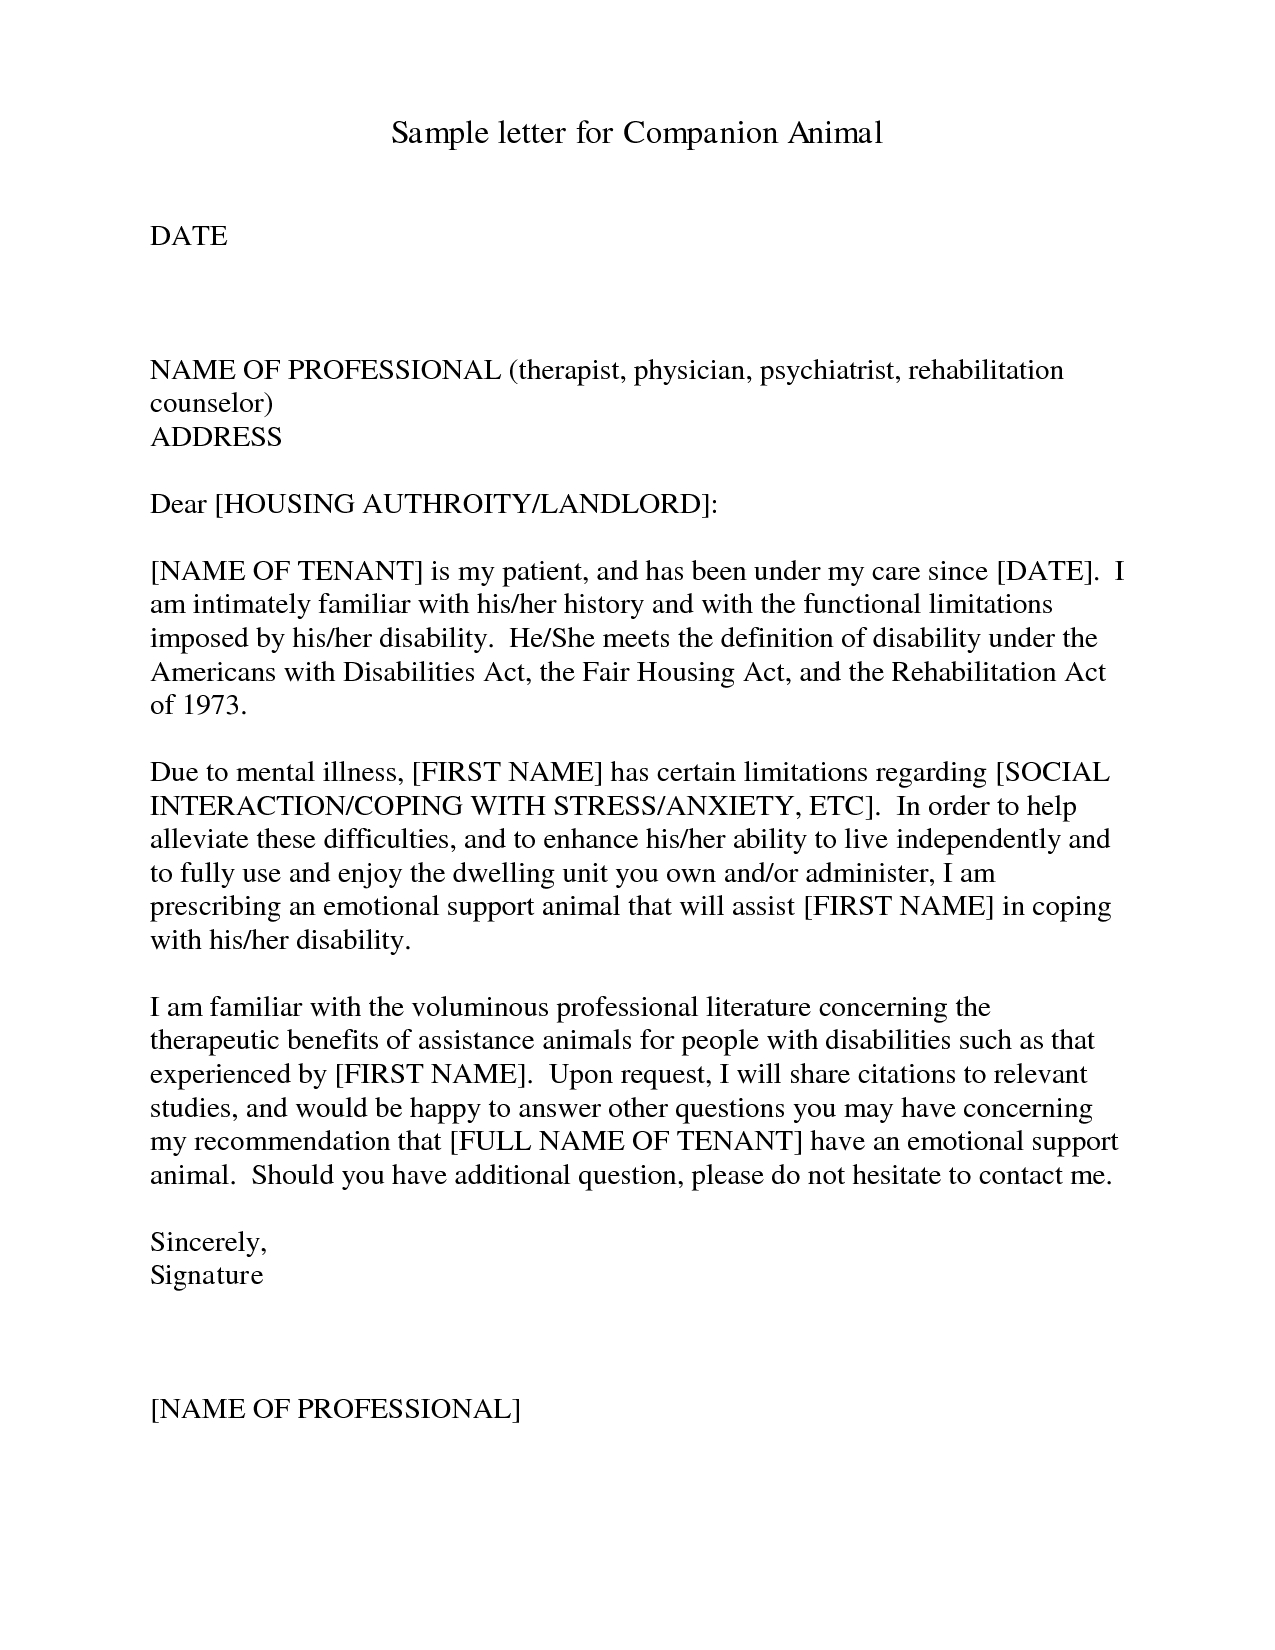 Letter Of Recommendation For Pet Adoption Debandje with sizing 1275 X 1650